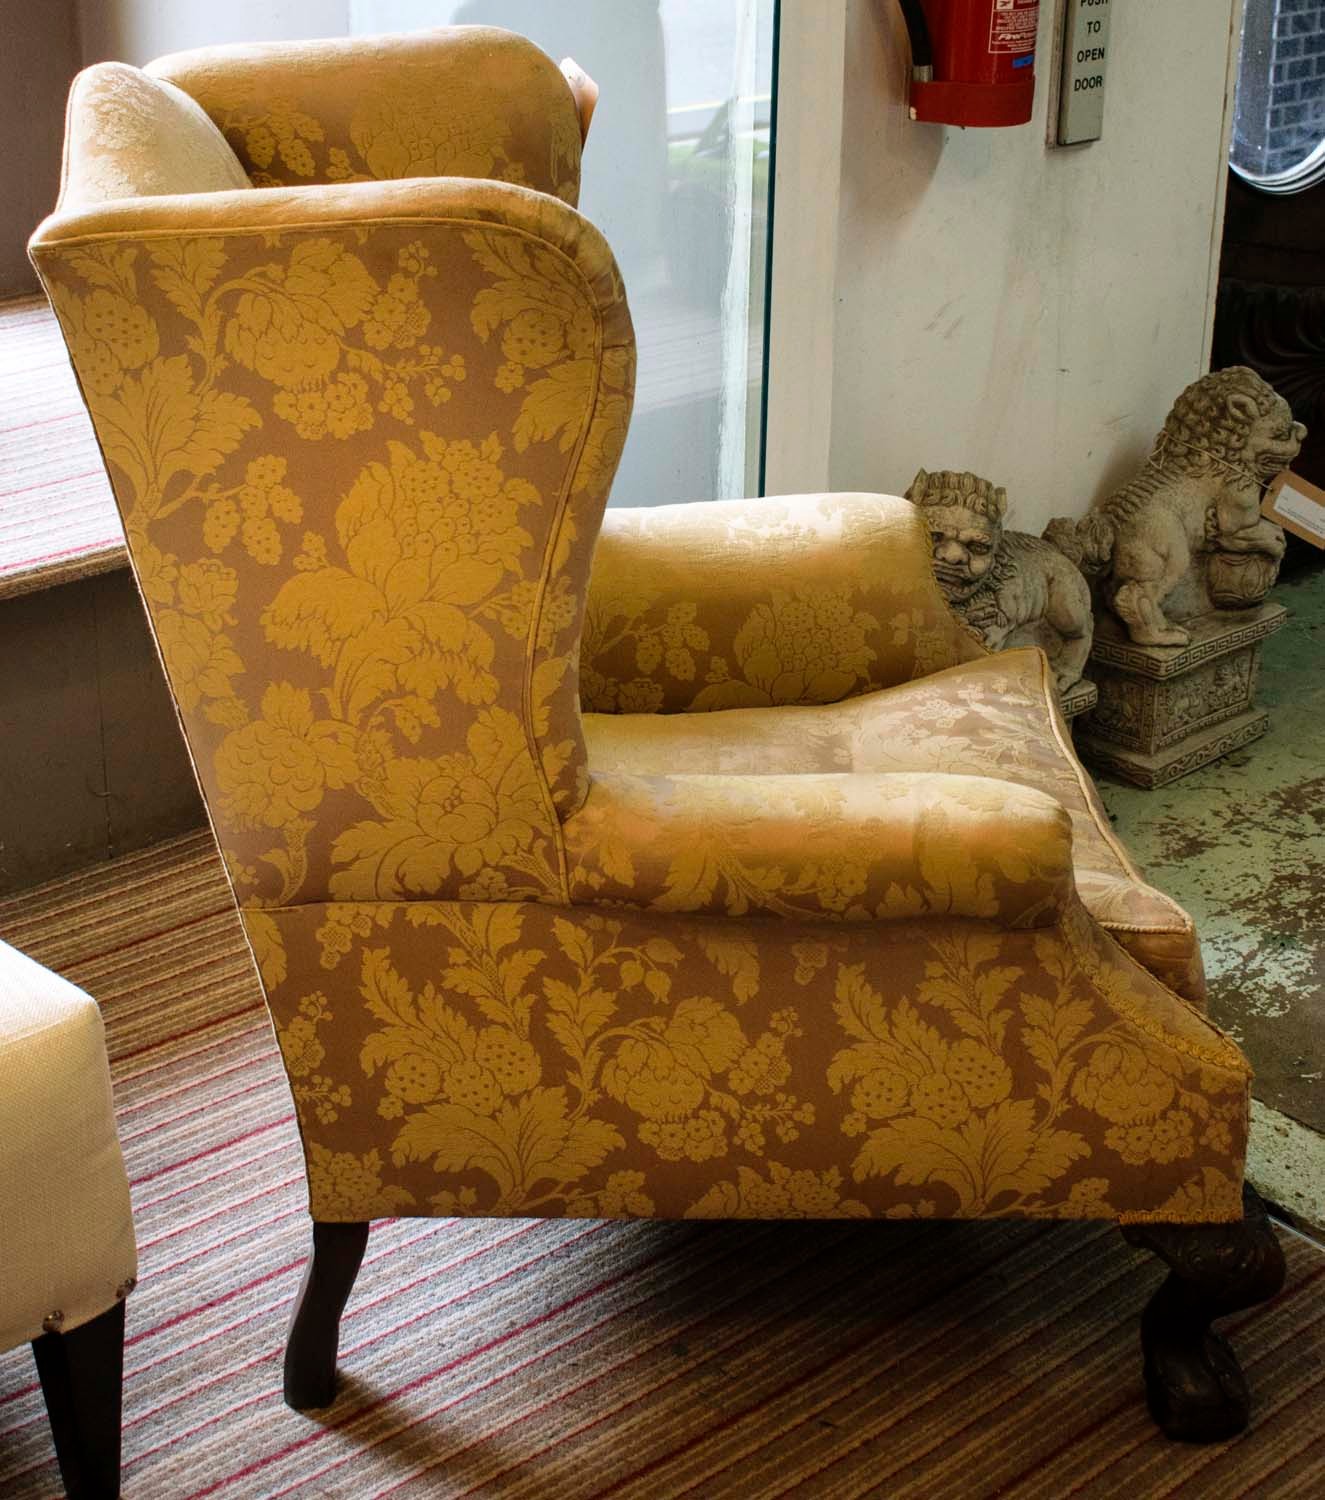 WINGBACK CHAIR, 76cm W x 104cm H, damask upholstery, with claw and ball carved supports. - Image 8 of 12